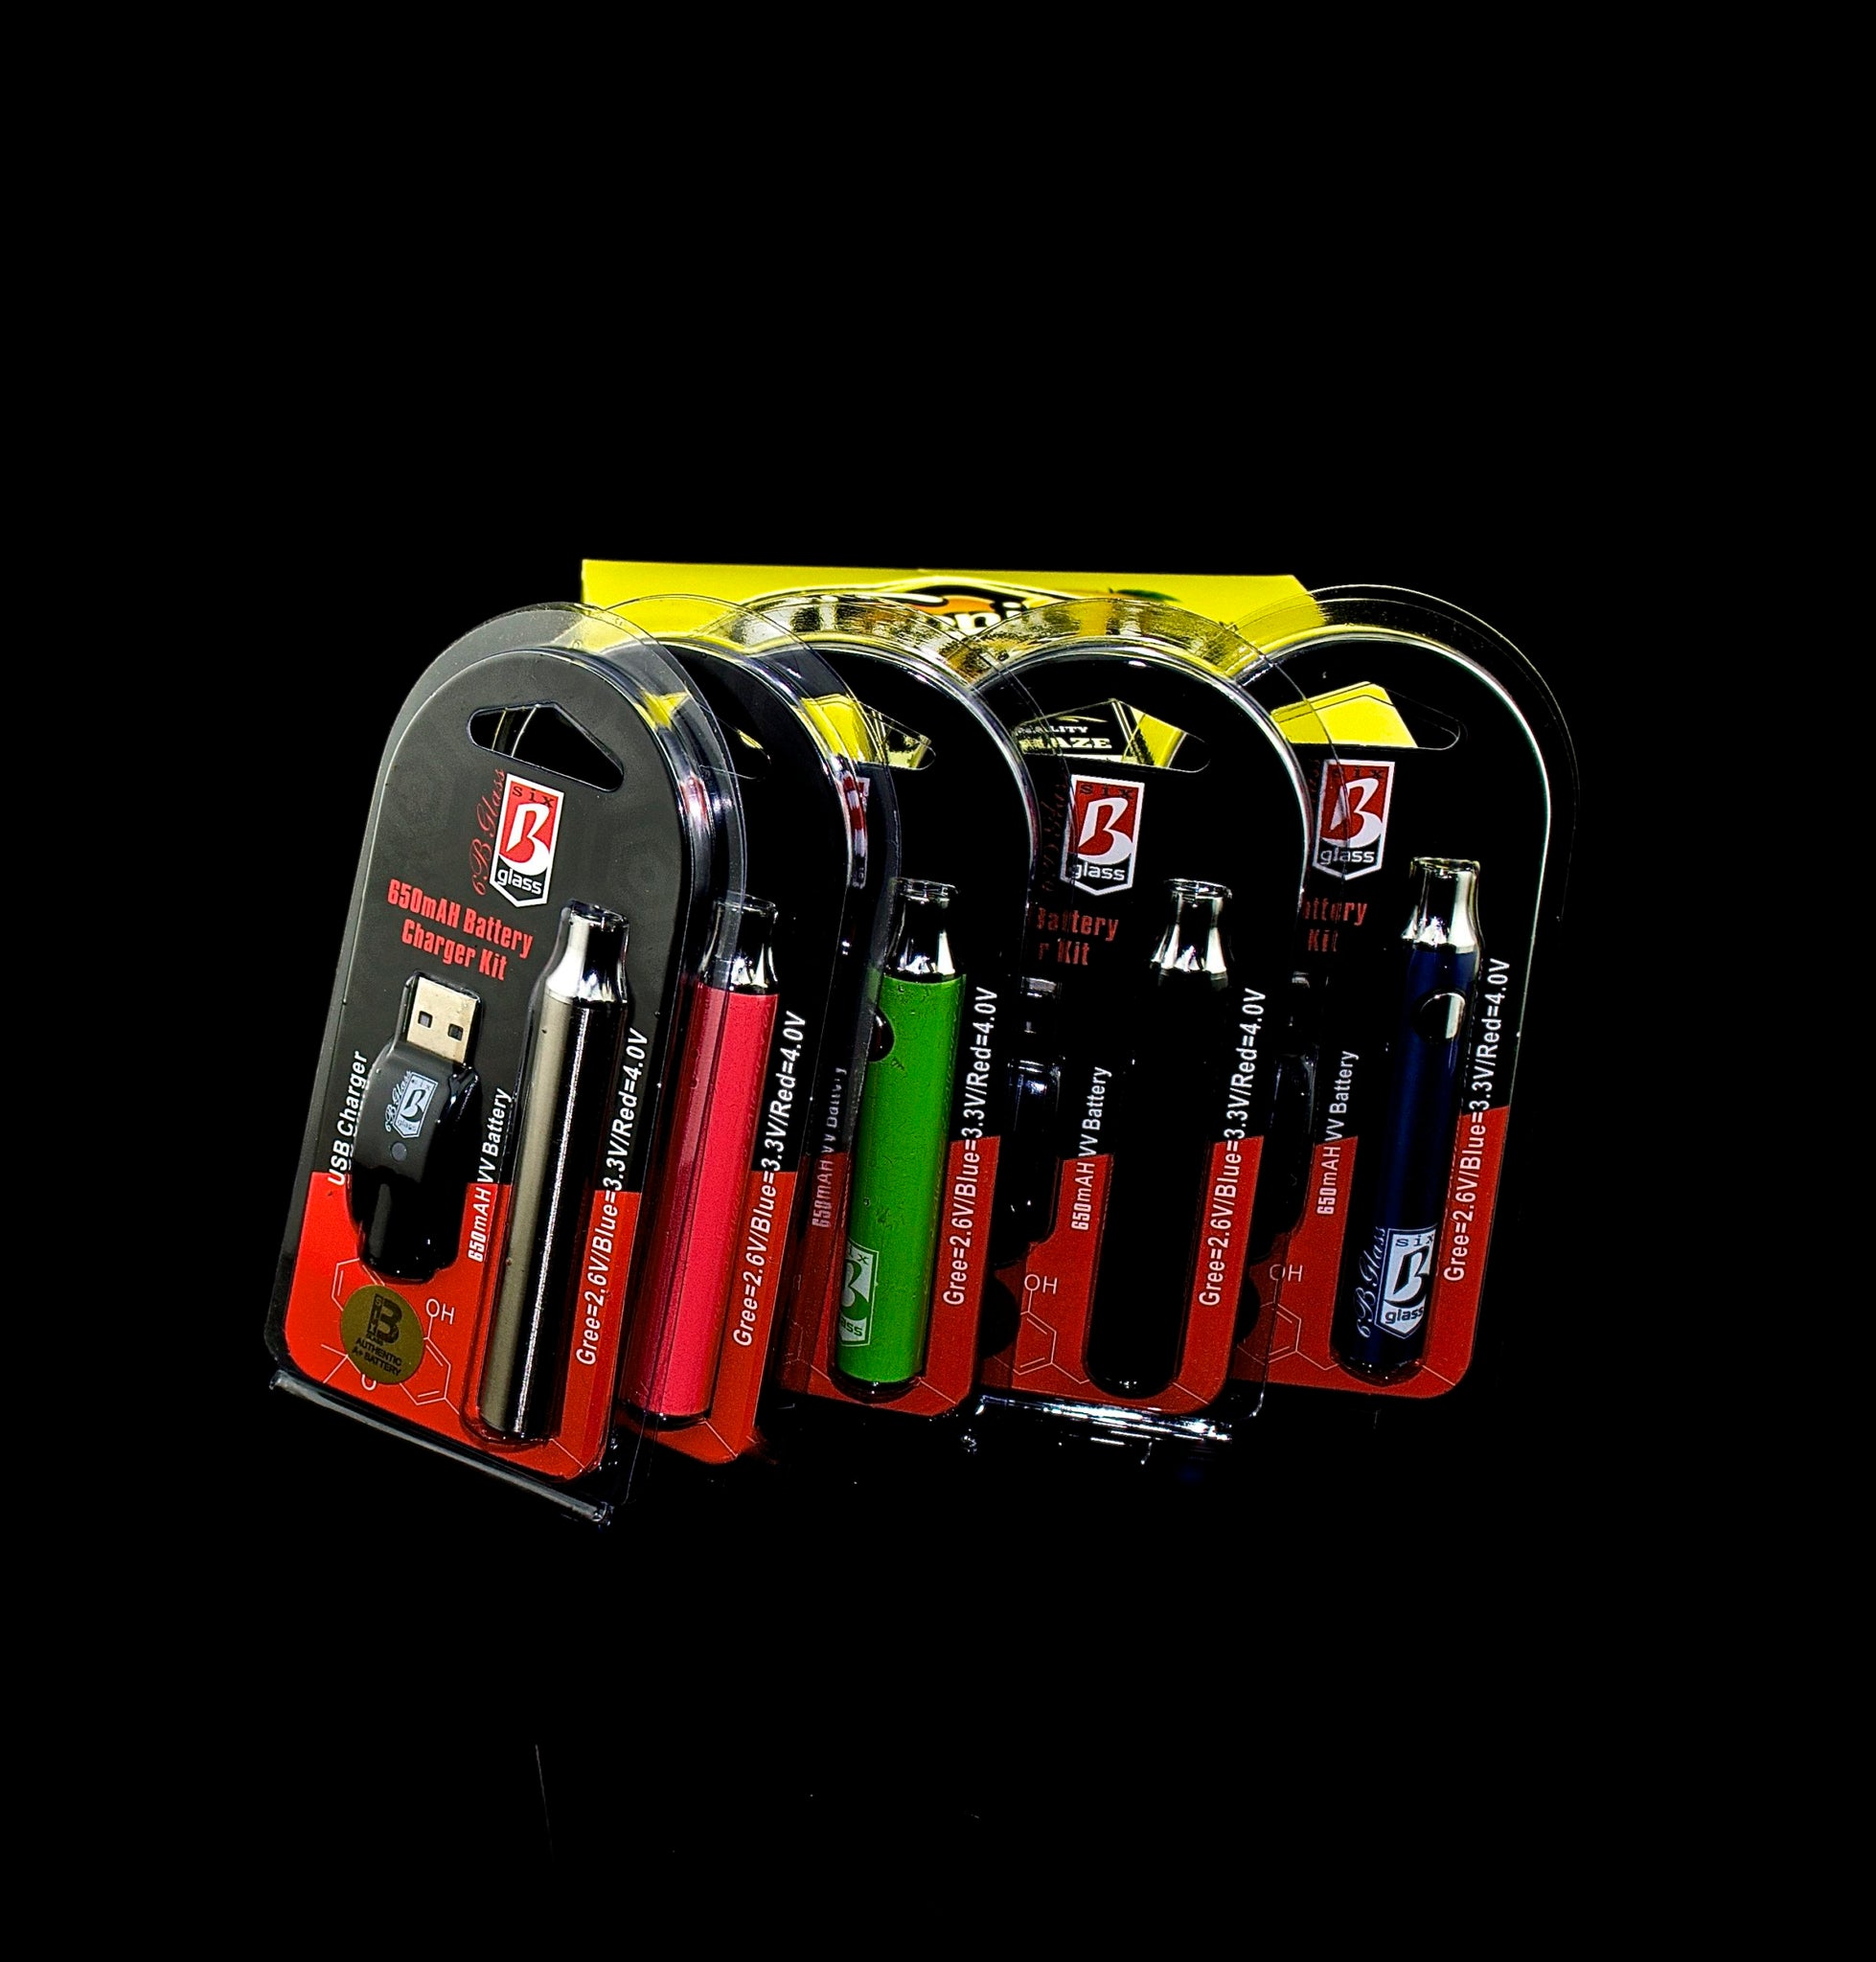 650mAh 6B Glass battery charger kit. (red and green available).-224